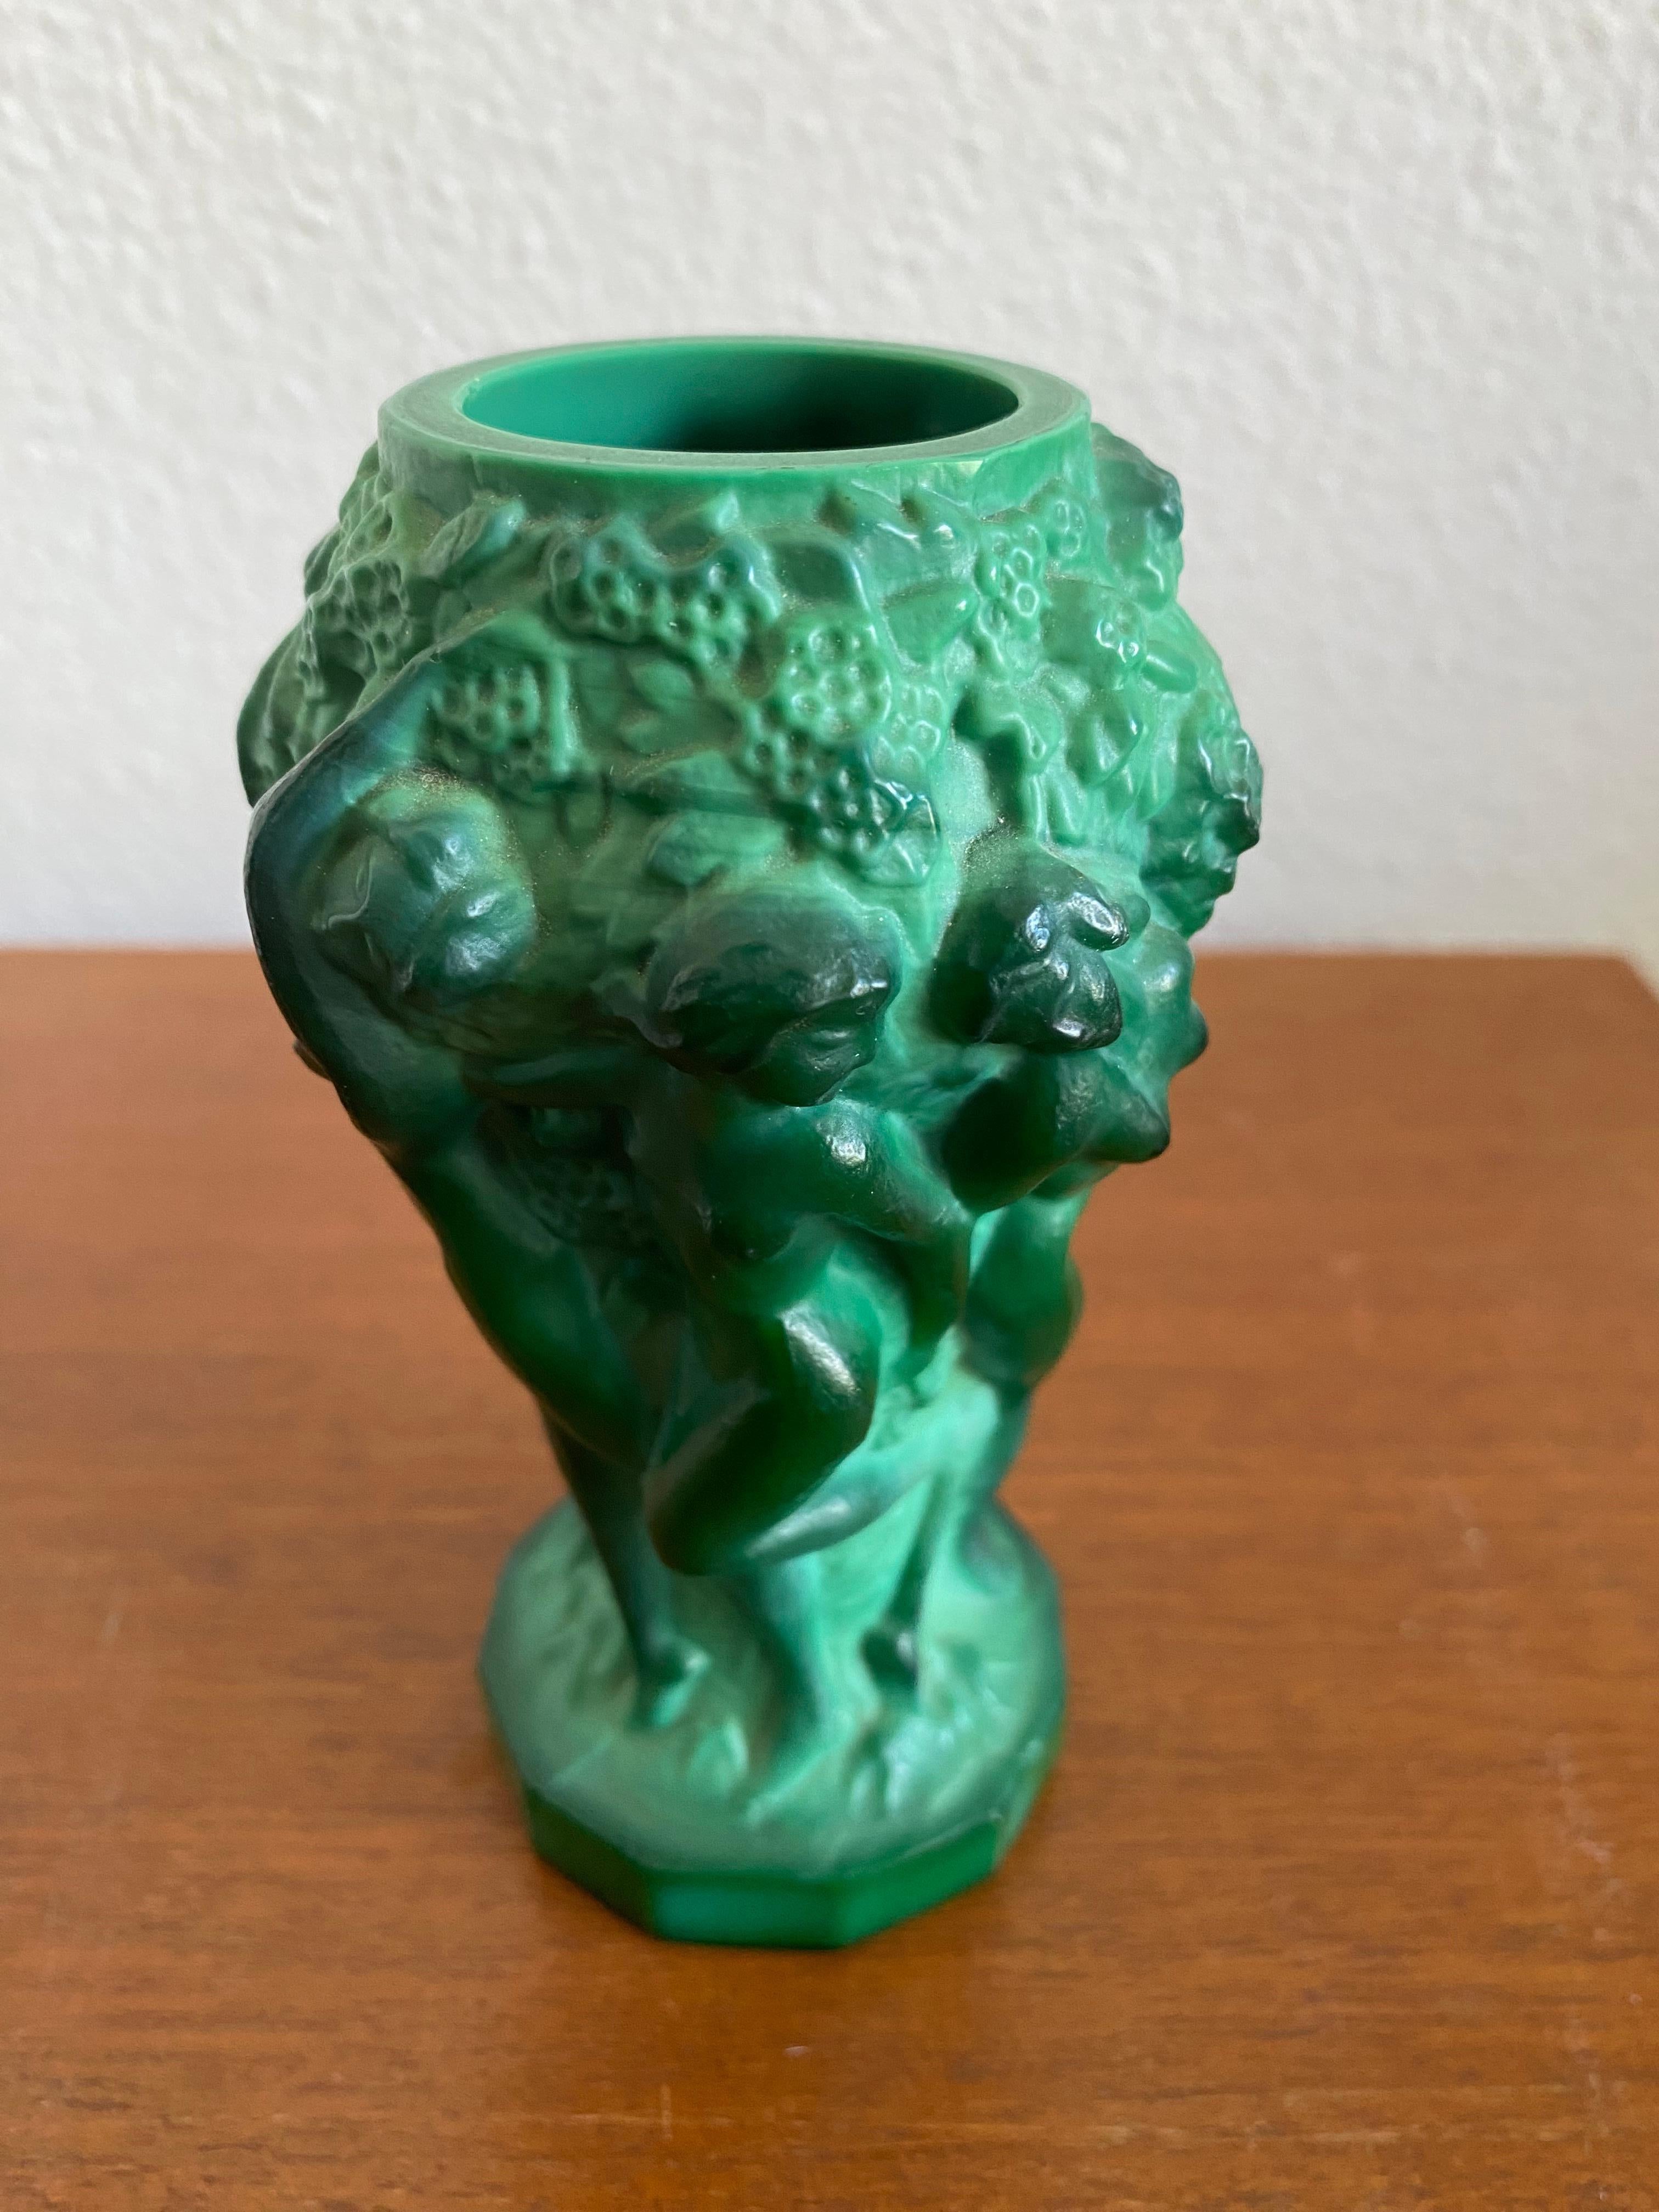 Art Deco Malachite Vase by Curt Schlevogt In Good Condition For Sale In Waddinxveen, ZH